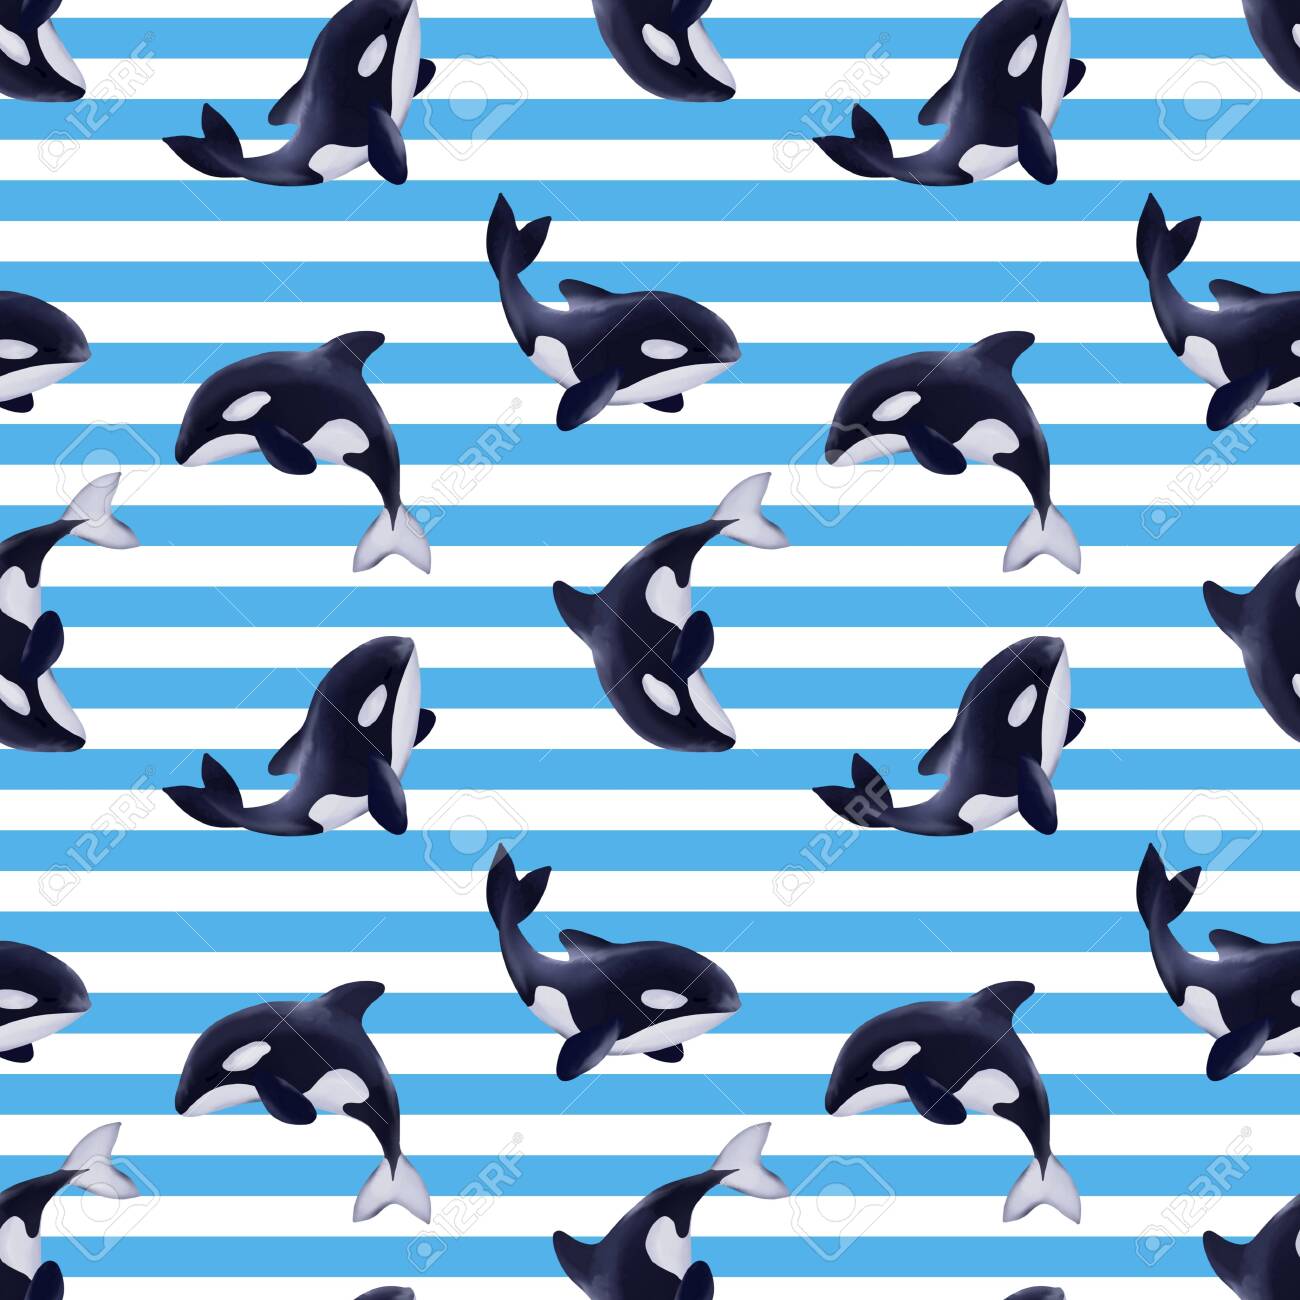 Seamless Pattern Of Killer Whales Background With Cartoon Orcas